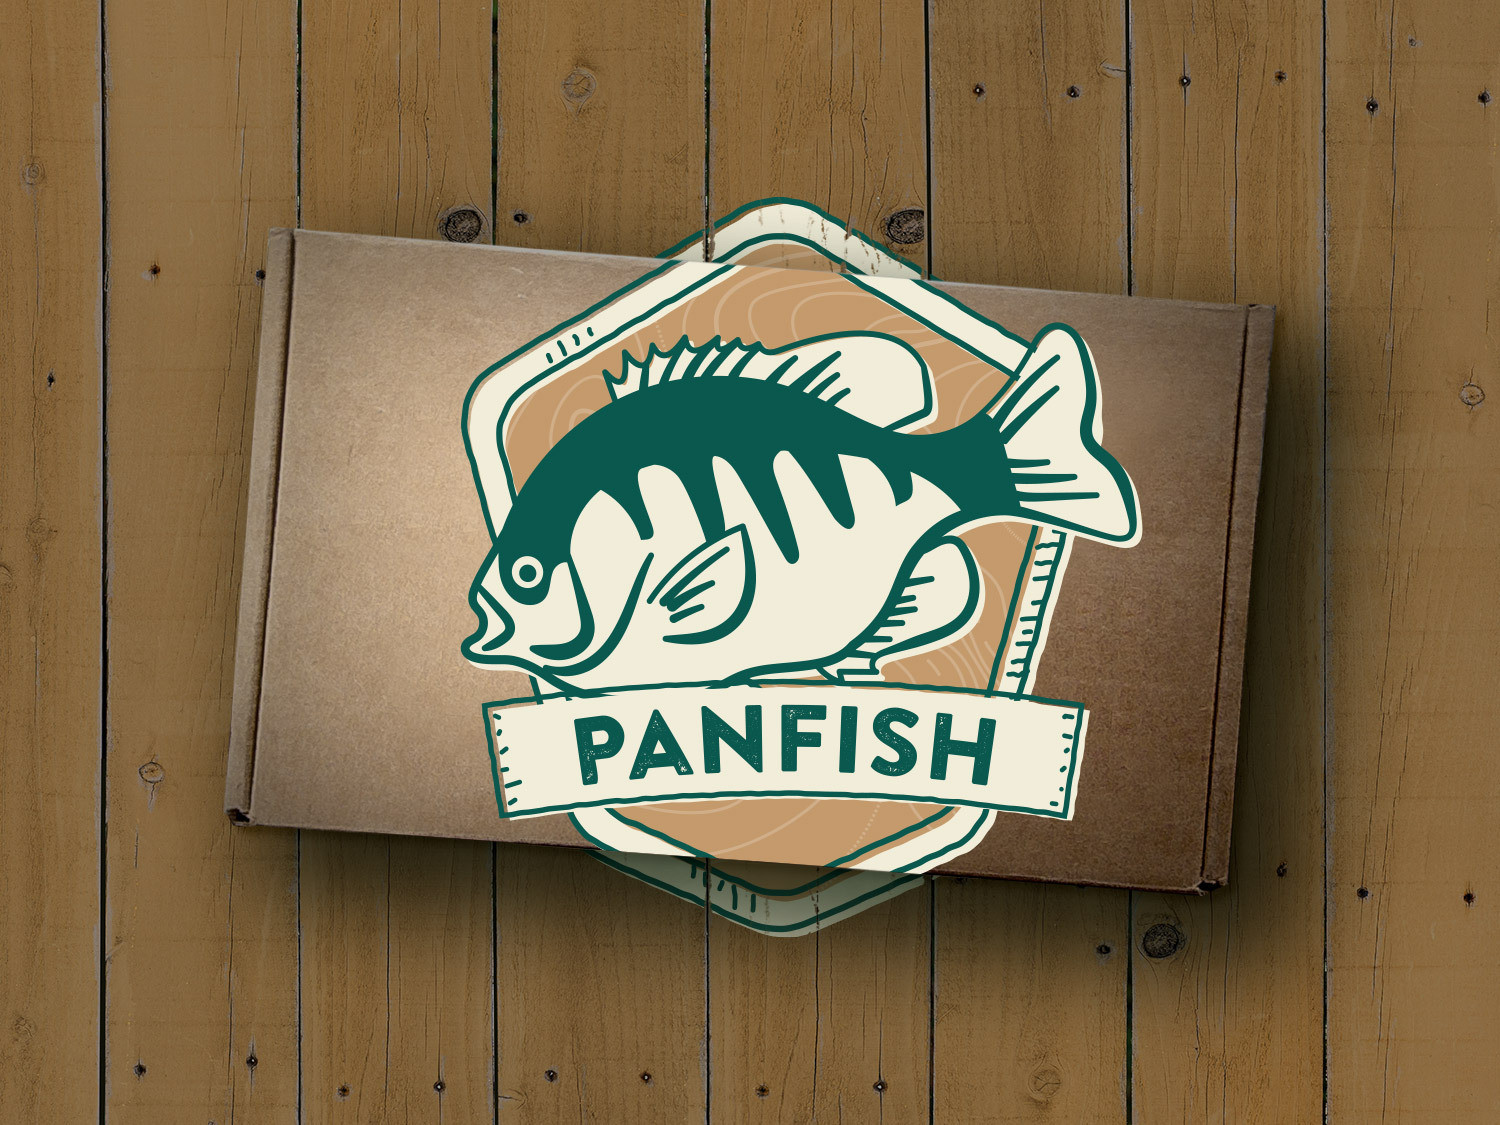 Multi-Species Fishing Gift Box - Panfish, Crappie, Bluegill and more –  MONSTERBASS